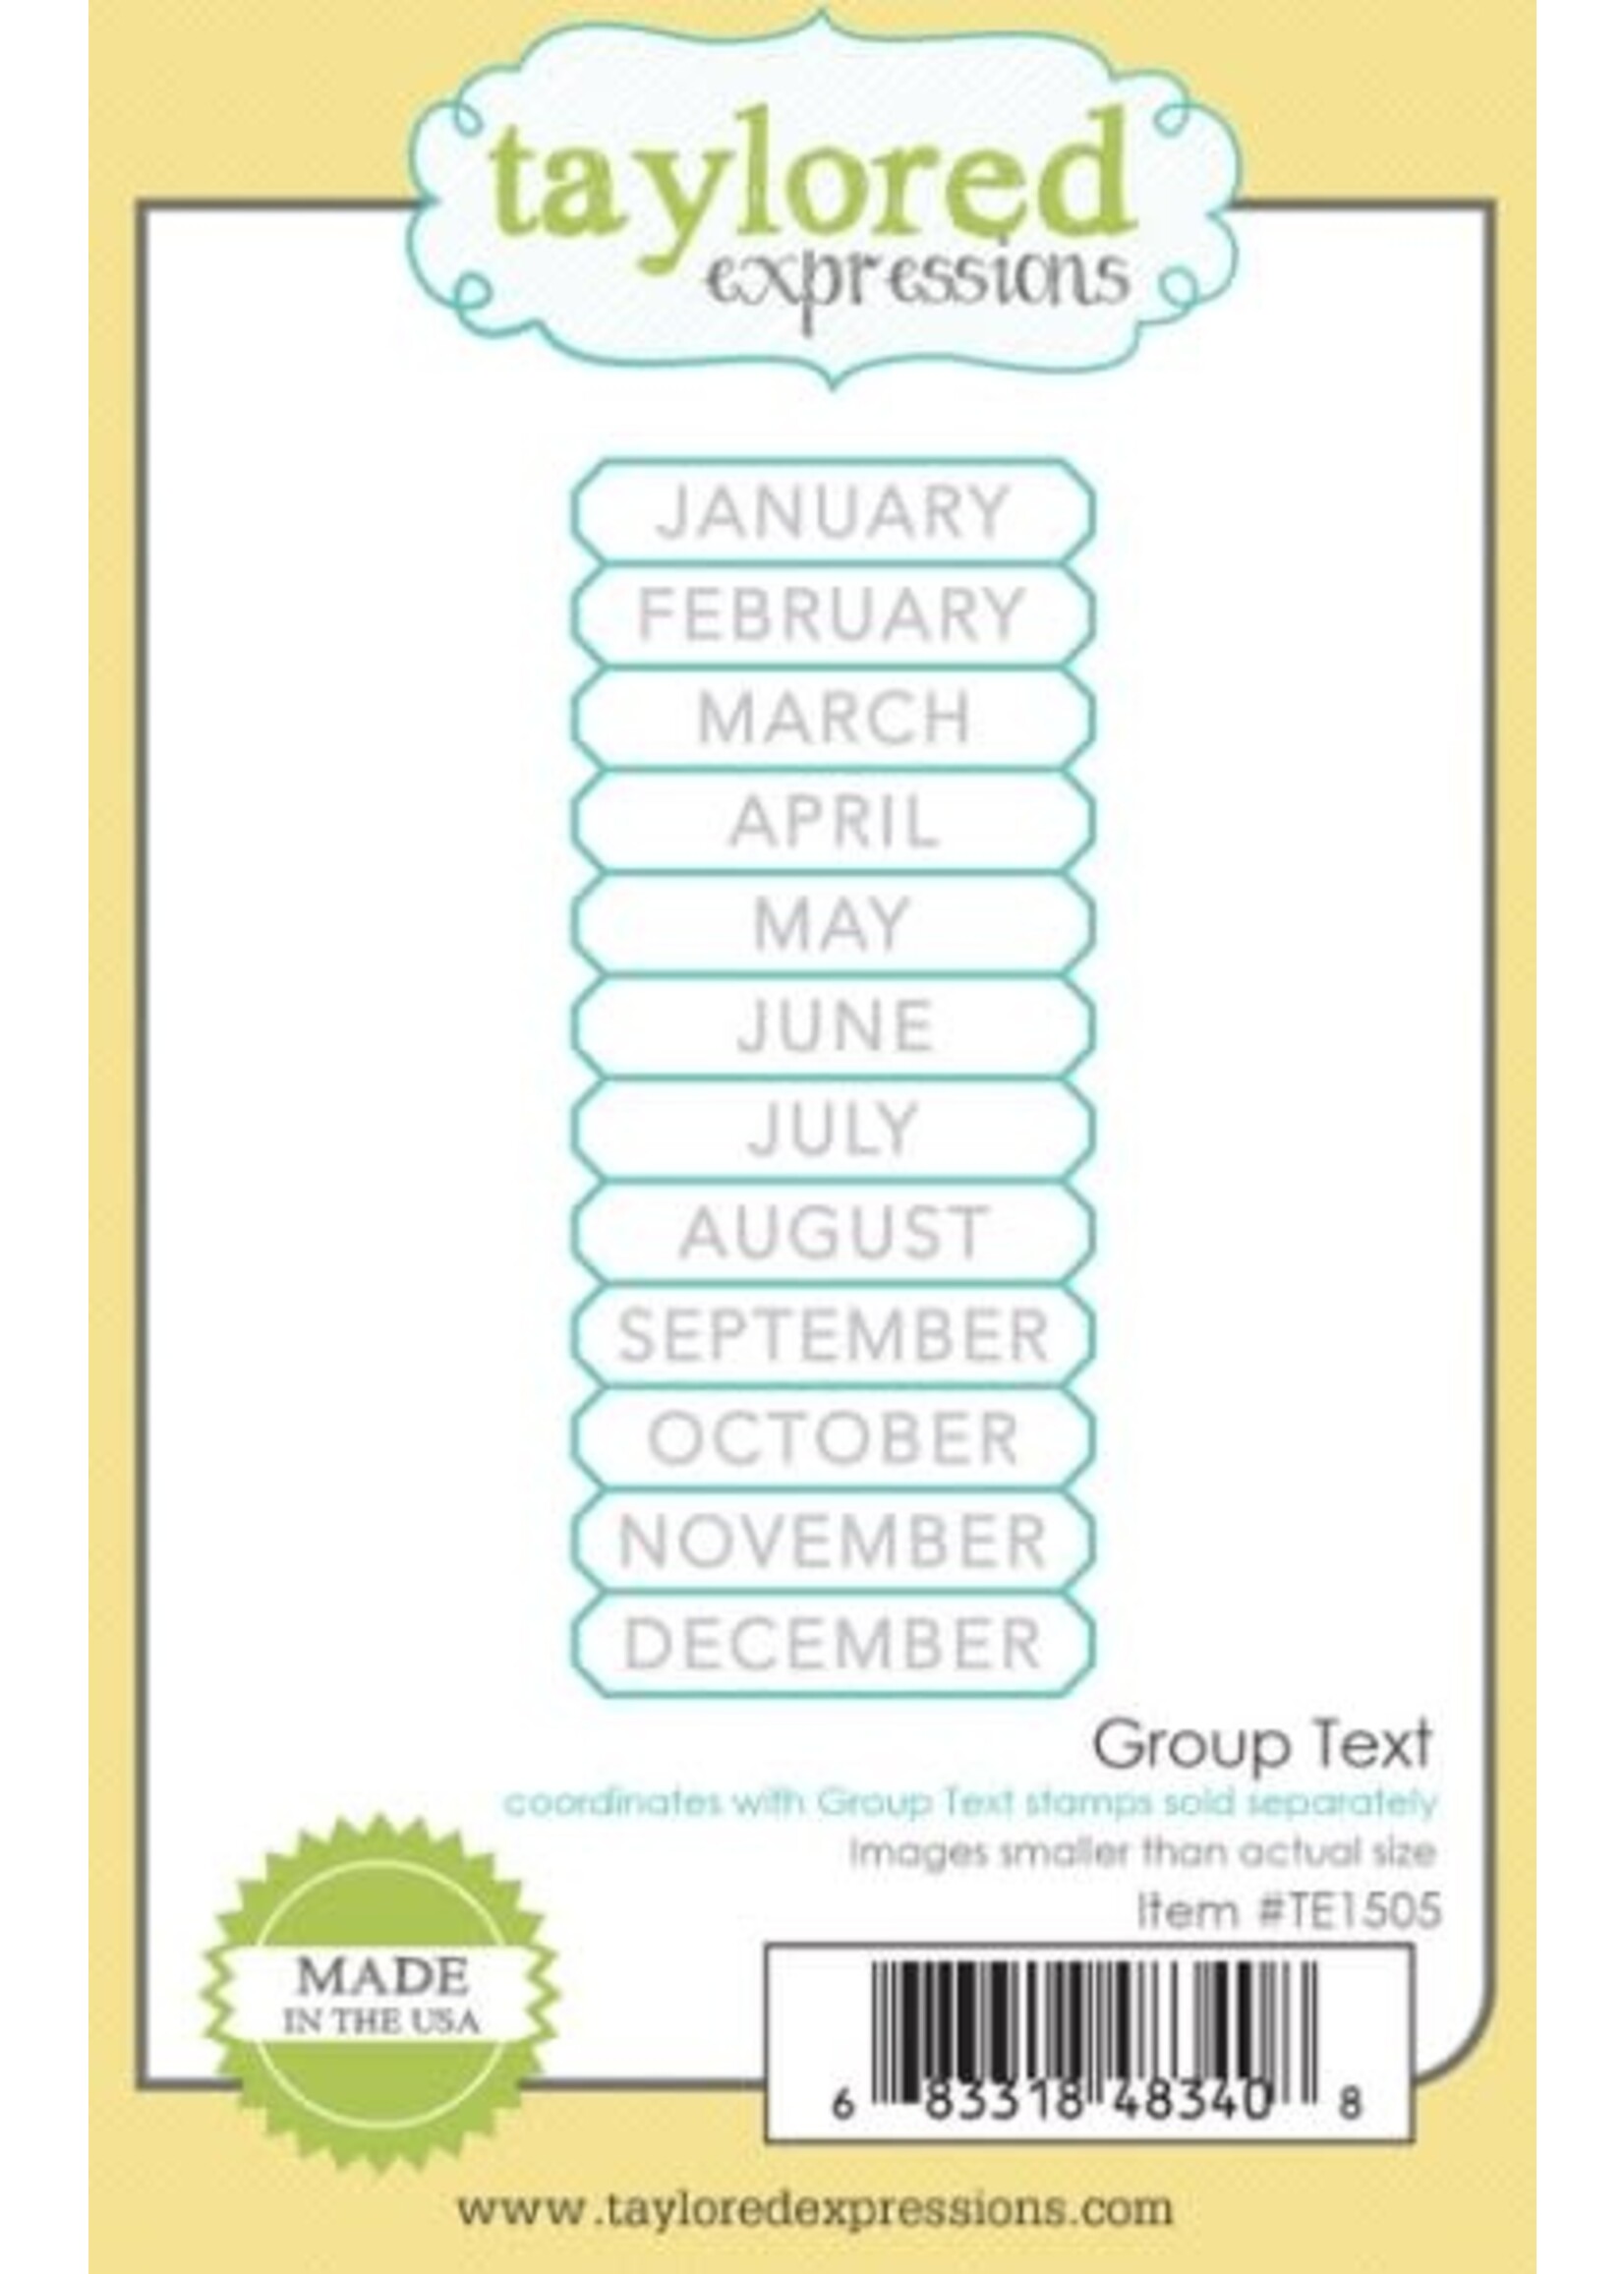 Taylored Expressions Red Rubber Stamp & Die Bundle, Group Text Months